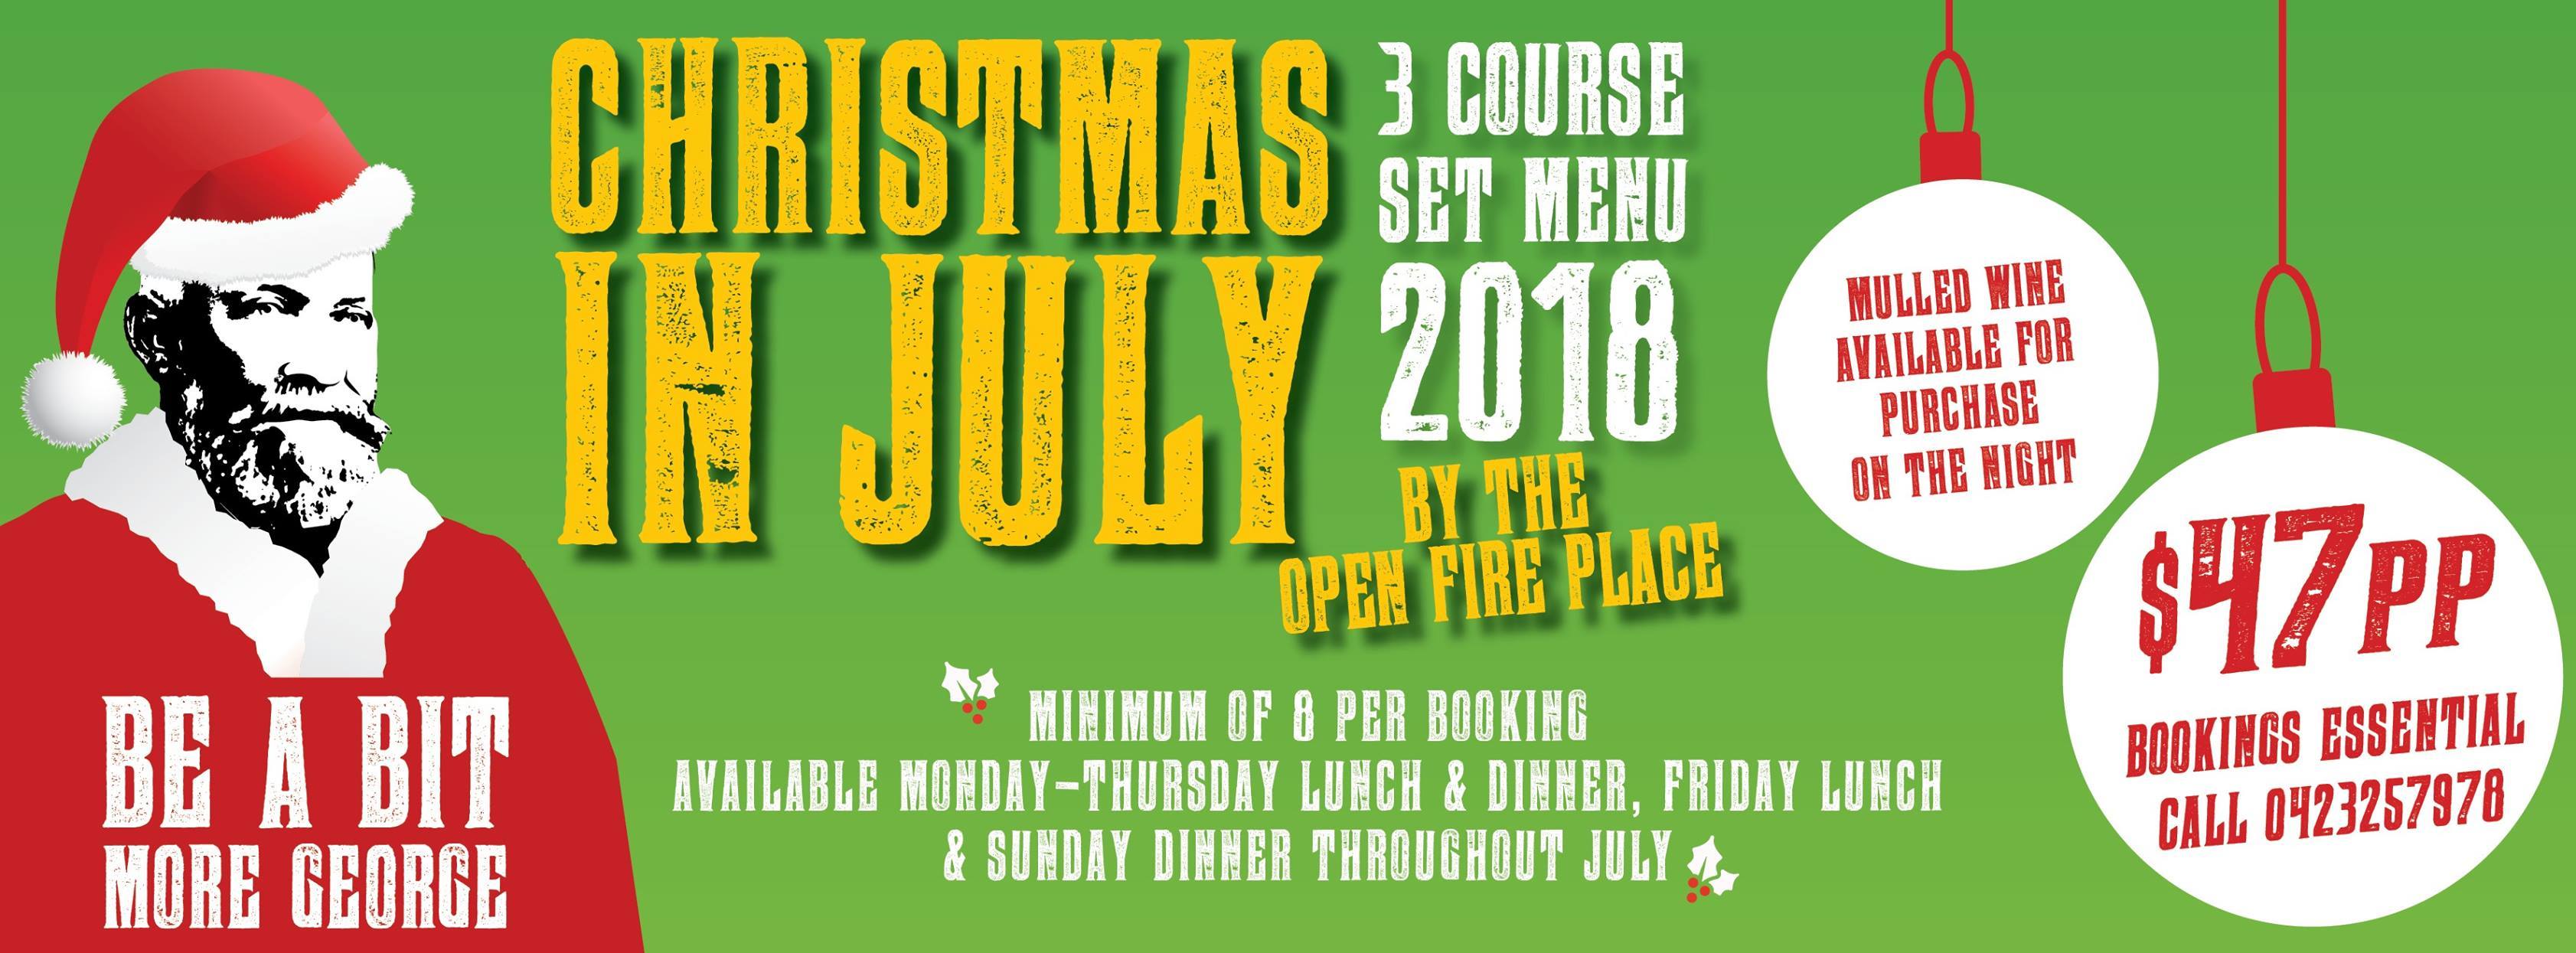 Christmas in july 2018 by the open fire place